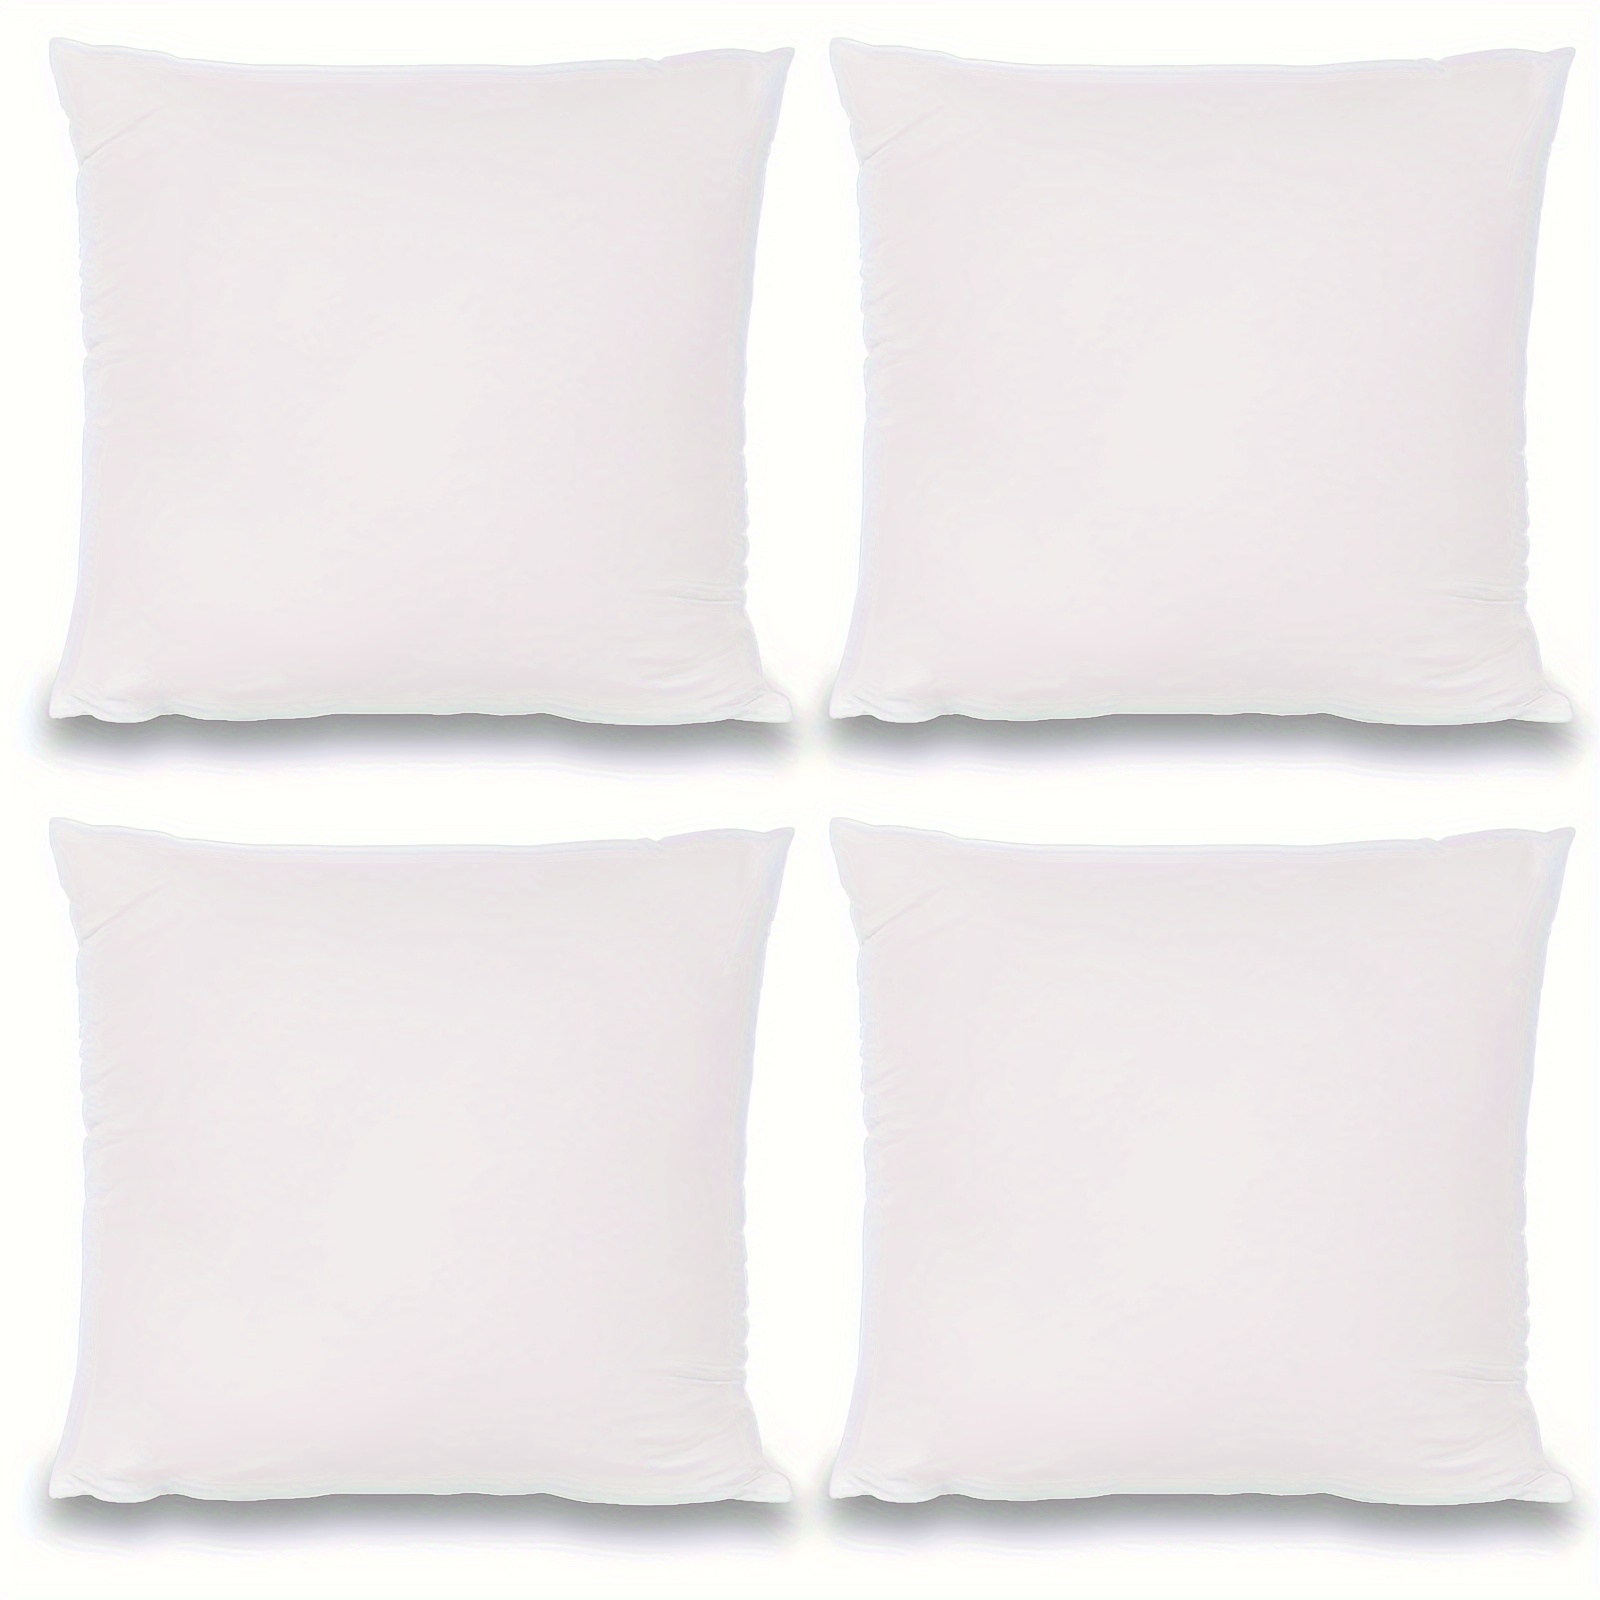 Decorative Throw Pillow Insert: Set of 4 Square Soft (White, 18x18) For  Sofa, Bench, Bed, Auto Seat Hypoallergenic Bed Couch Sofa- Indoor  Decorative Cushion 